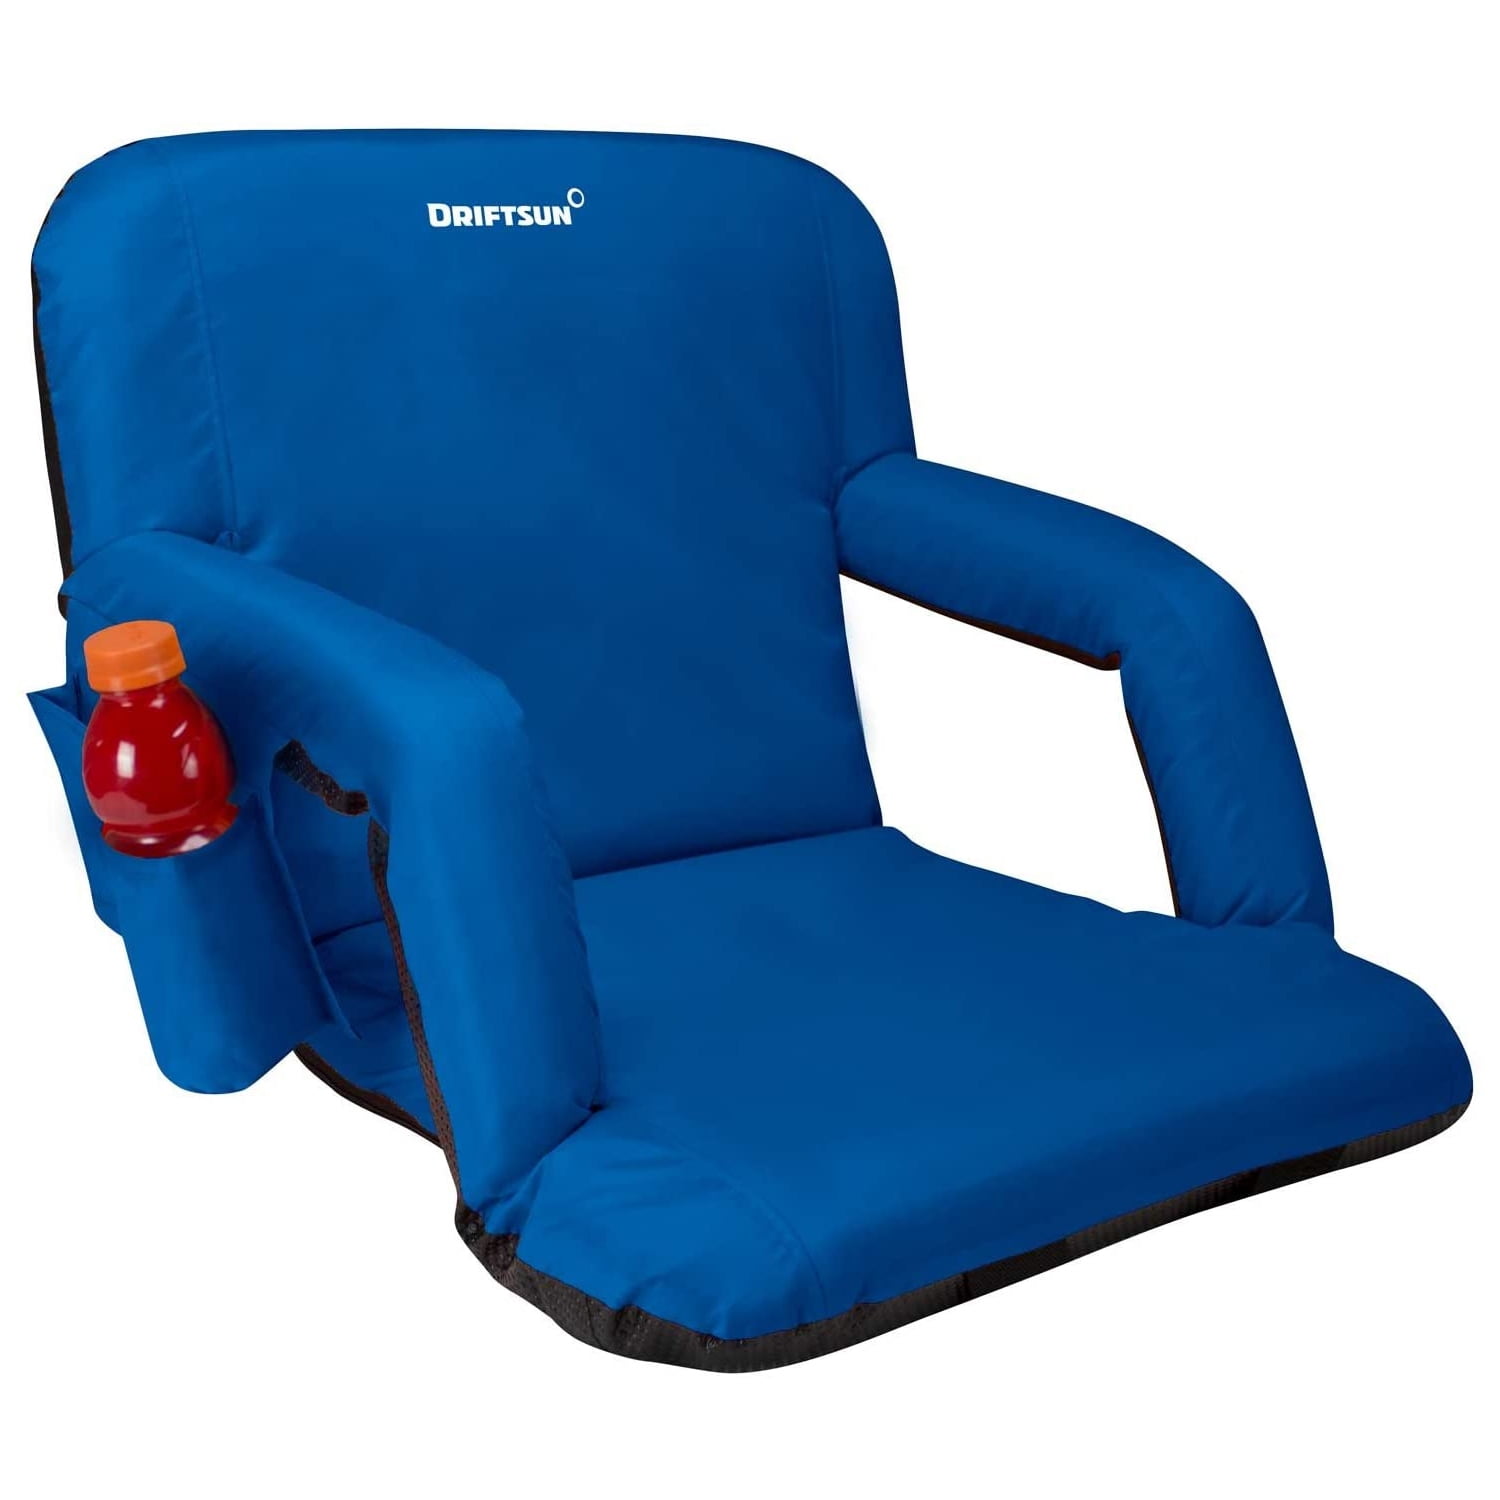 New Other Details about   Athletic Works Red Folding Stadium Seat w/ Arms & Shoulder Strap 